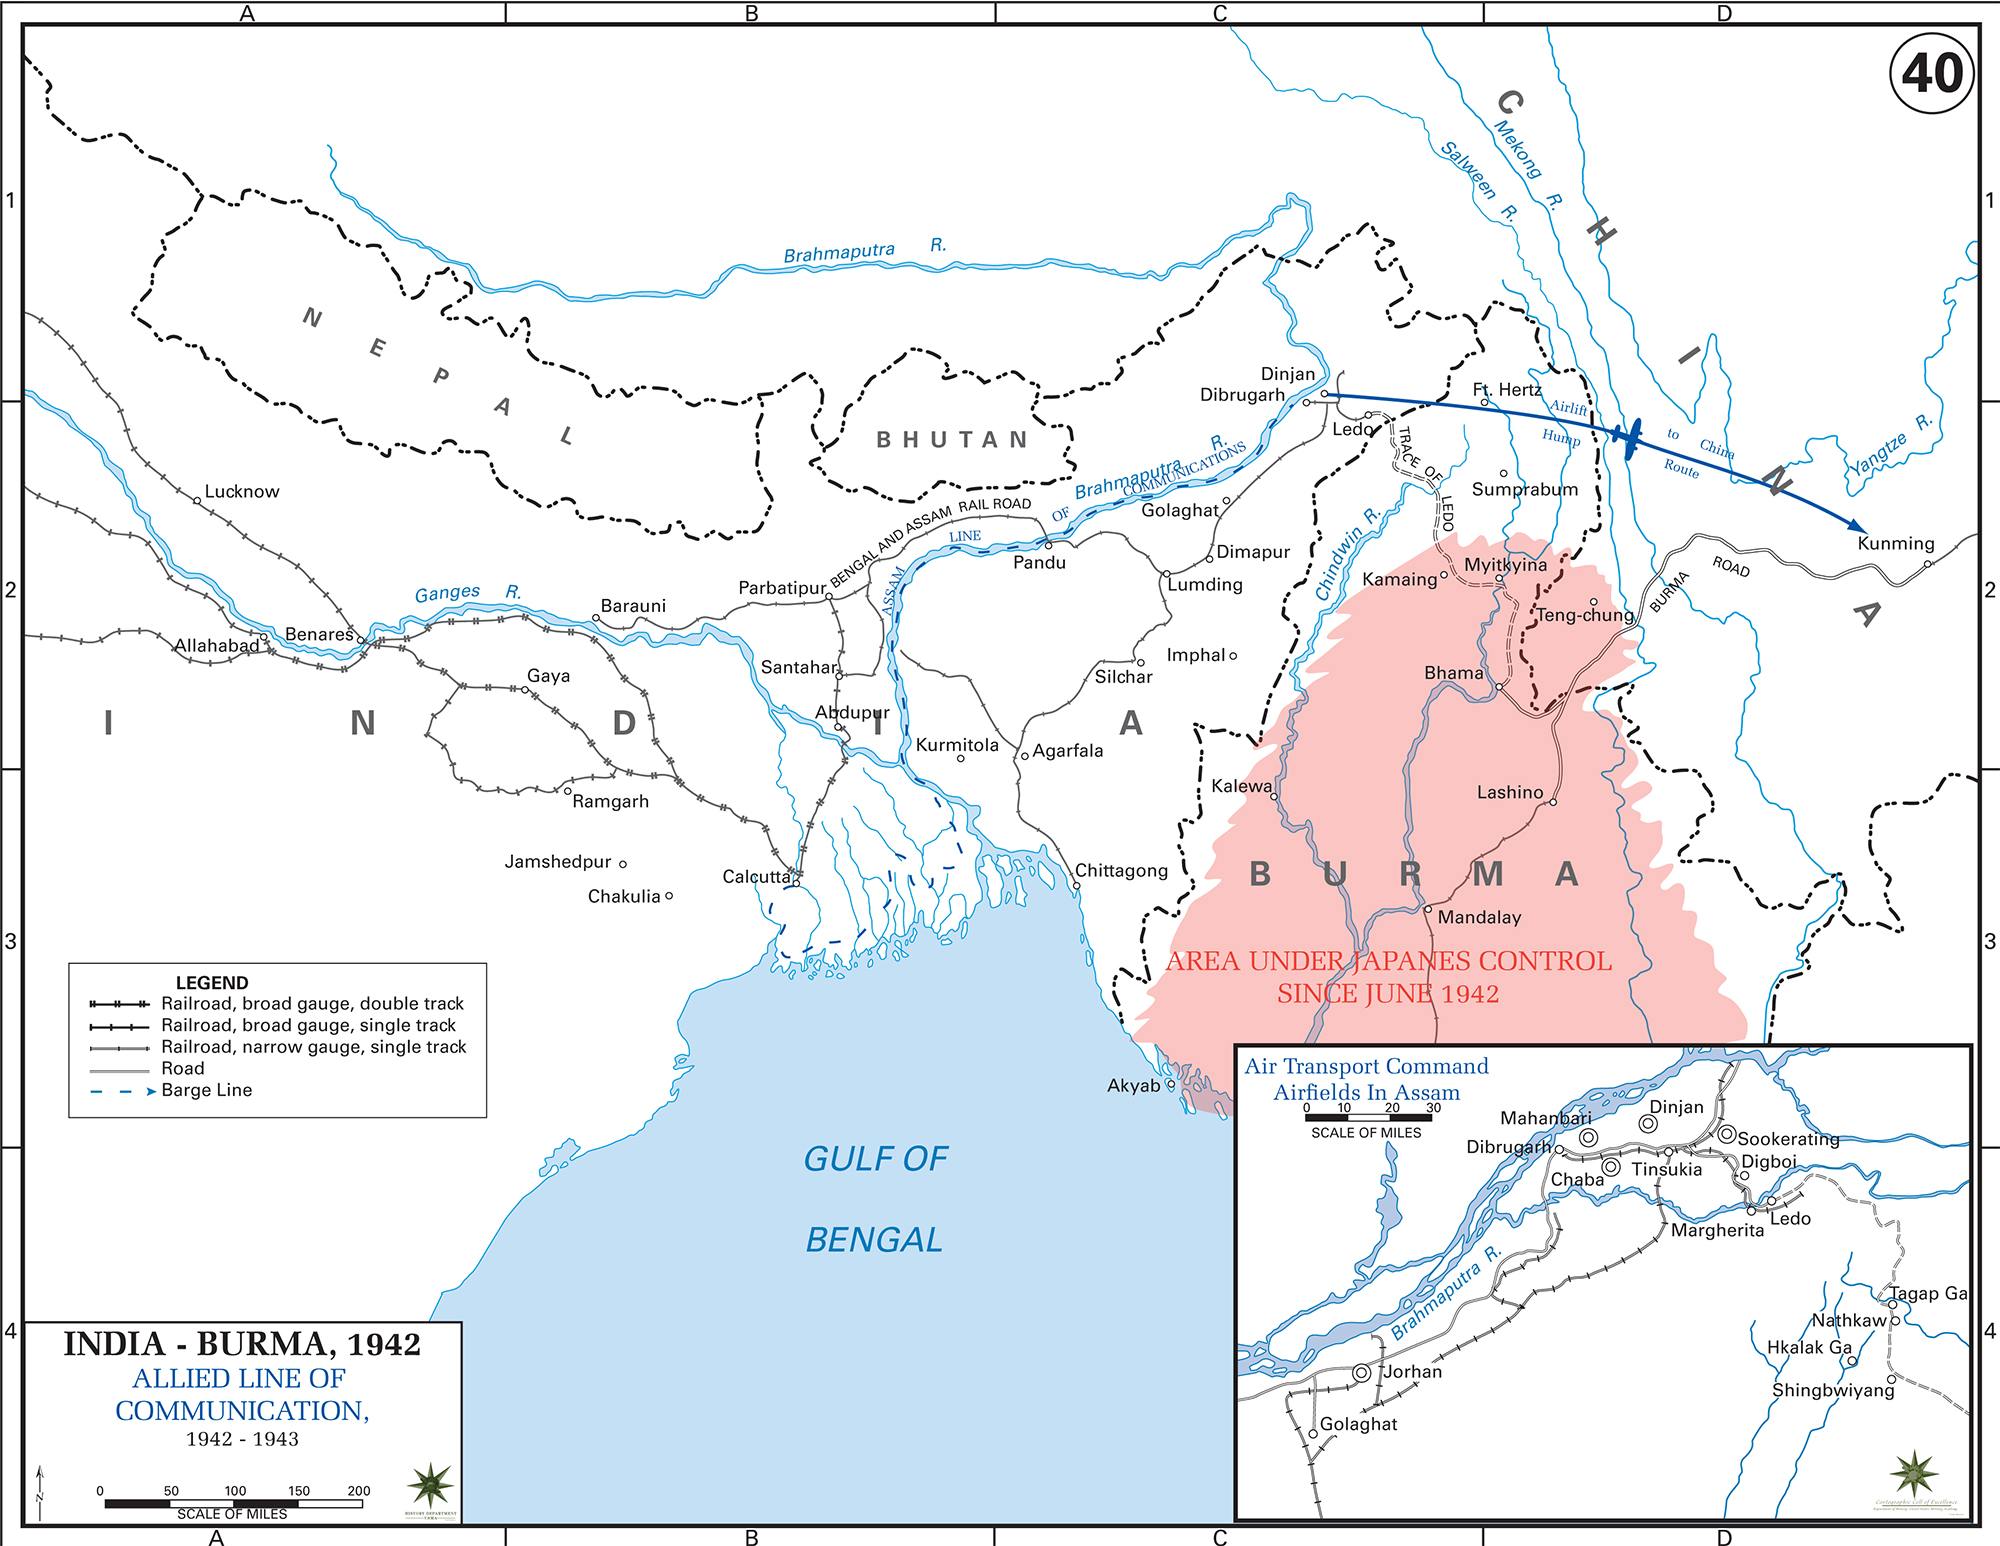 Map of WWII: India and Burma. Allied Line of Communications 1942-1943.